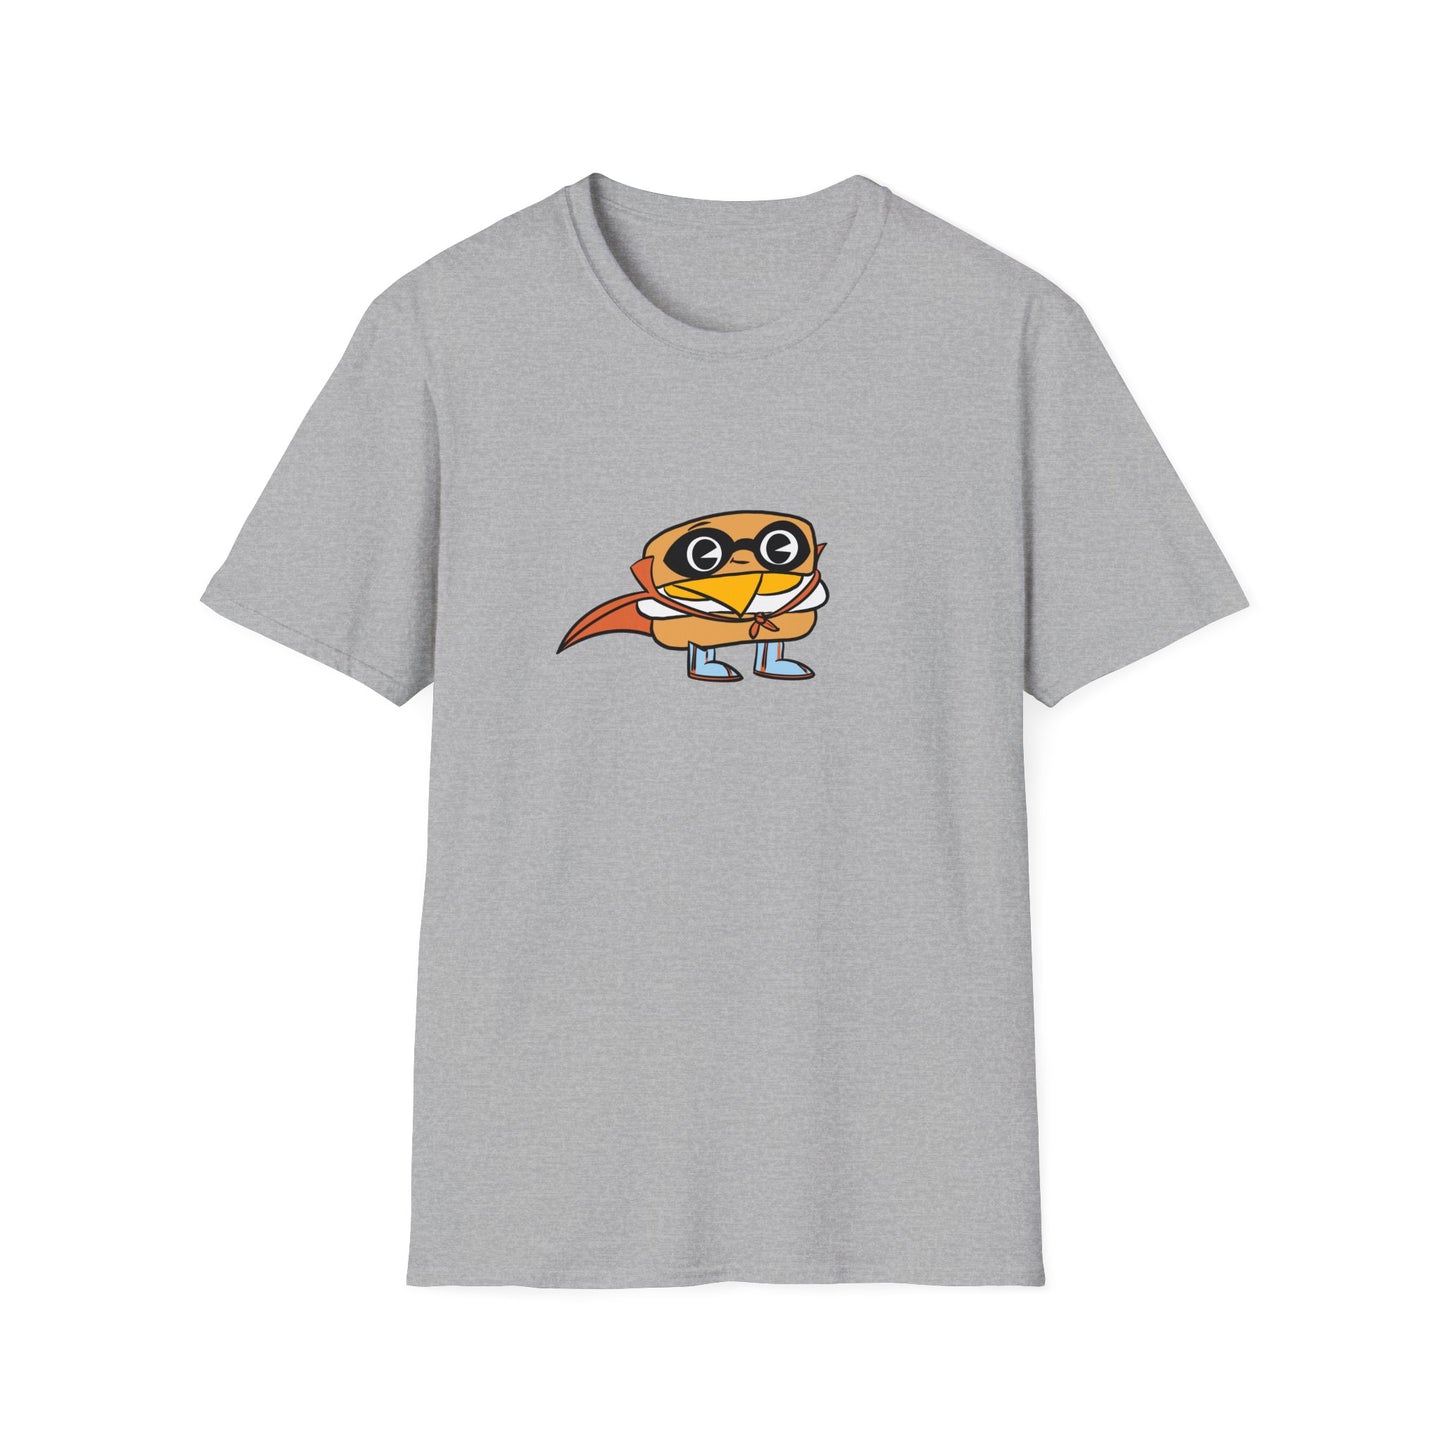 Superhero Biscuit - Unisex Softstyle T-Shirt - Charcoal